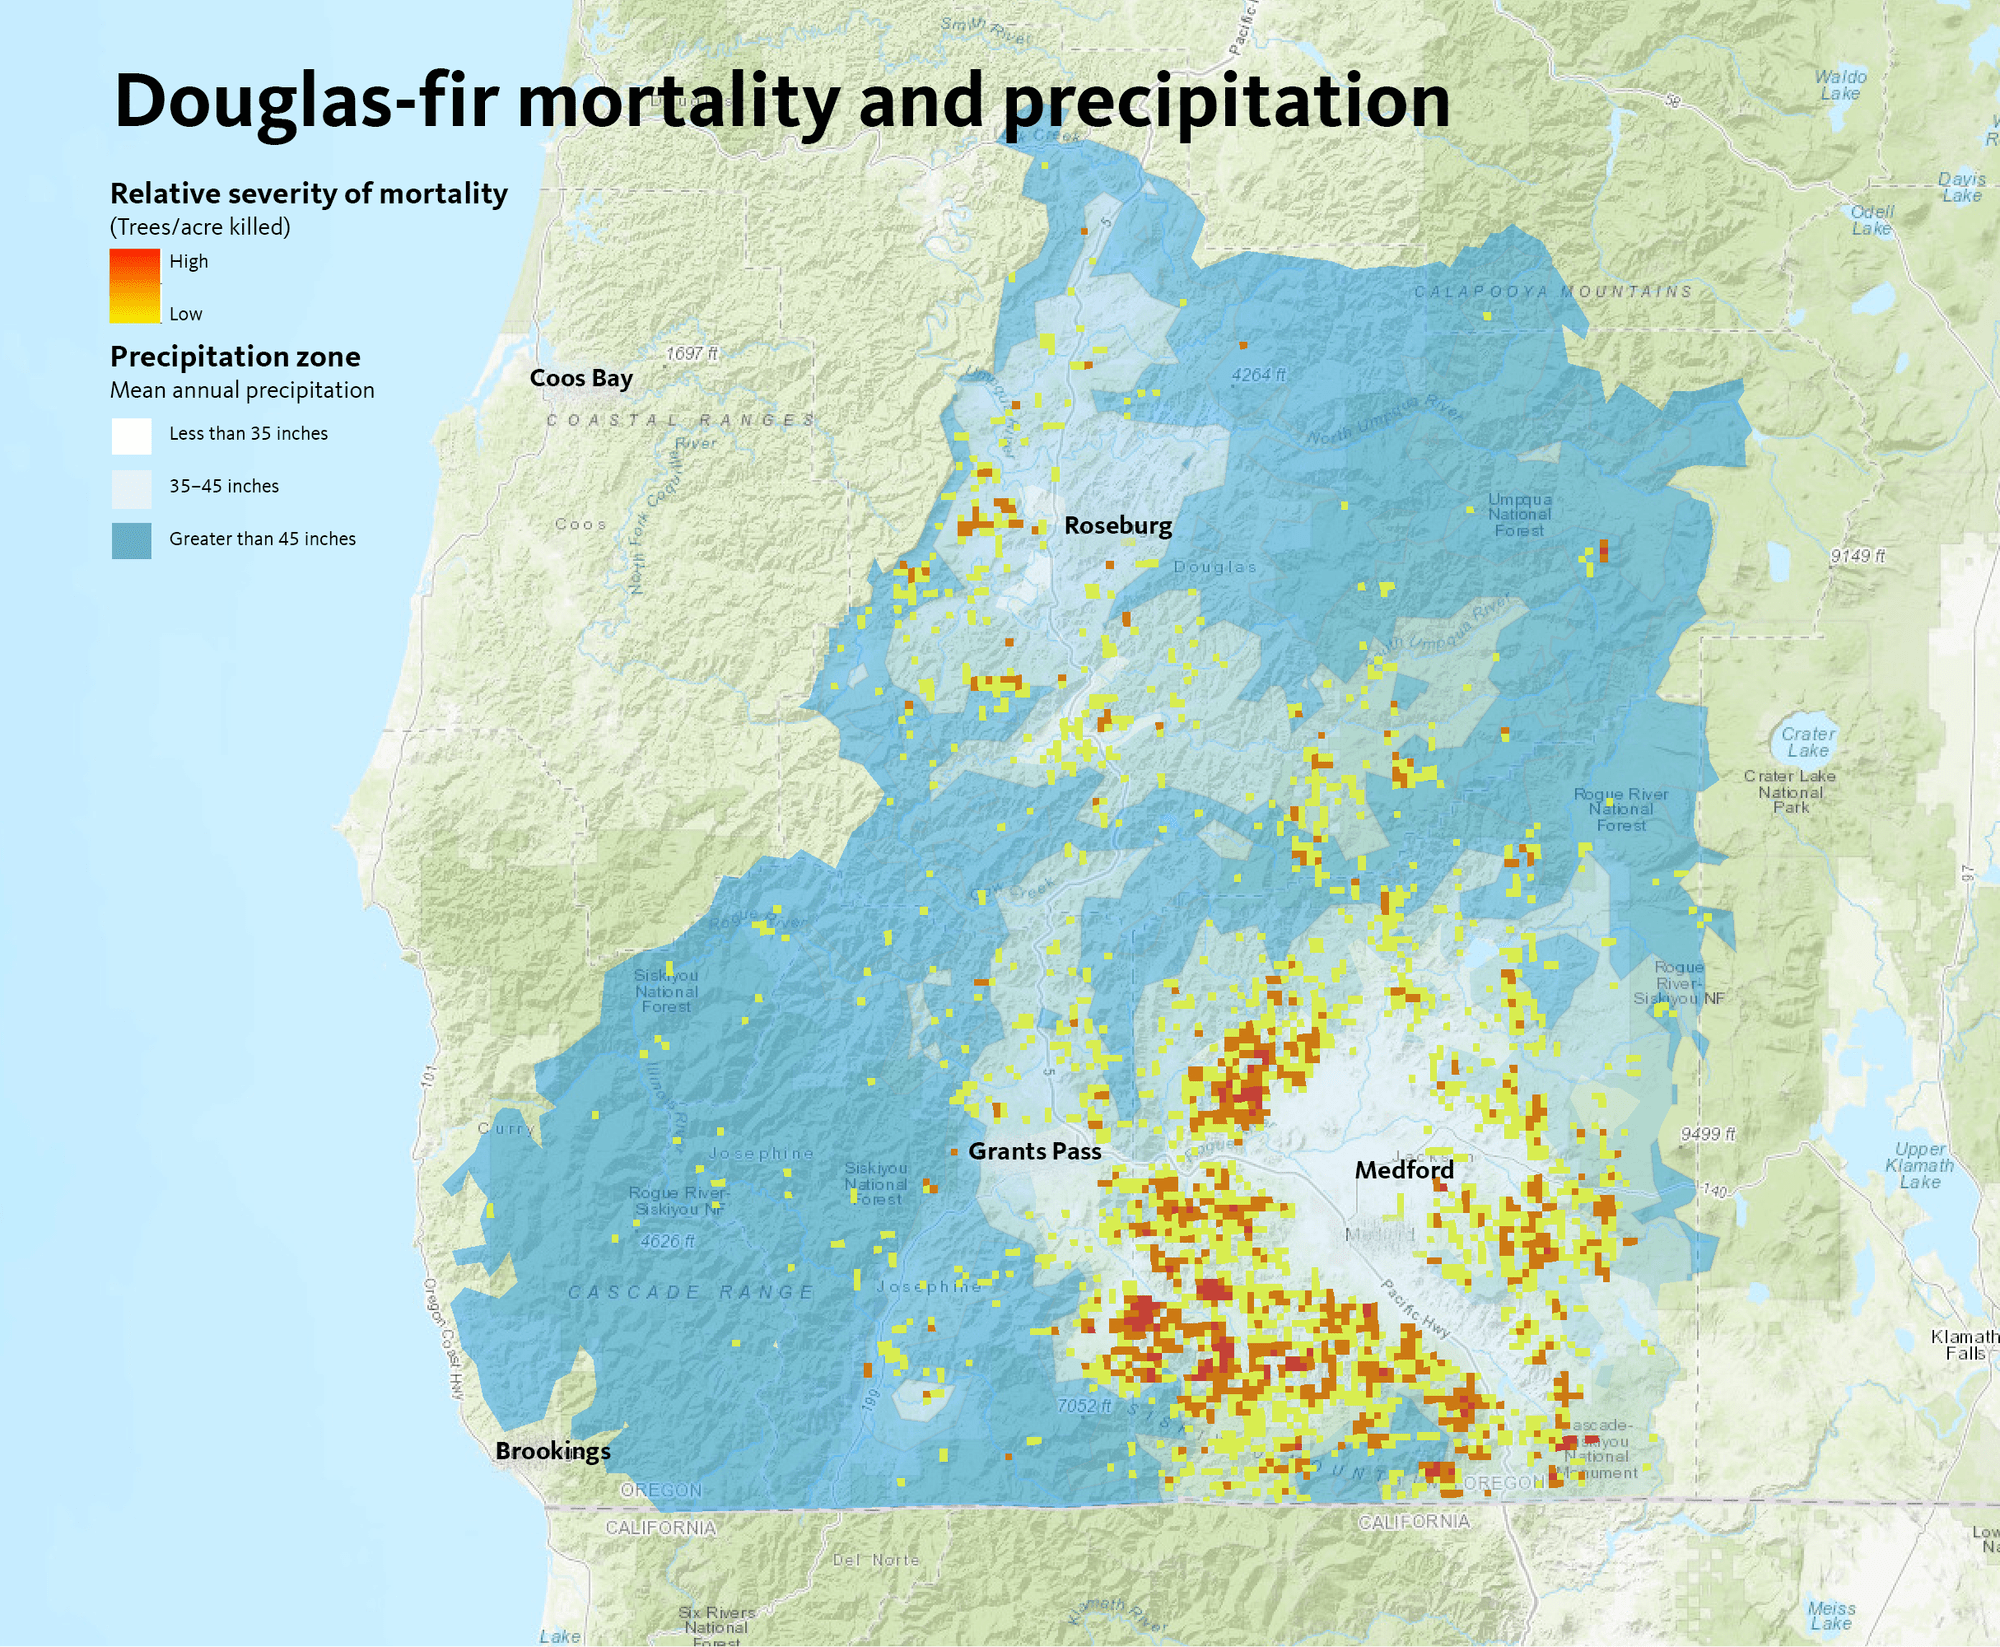 Map shows high degrees of mortality around Medford and Grants Pass